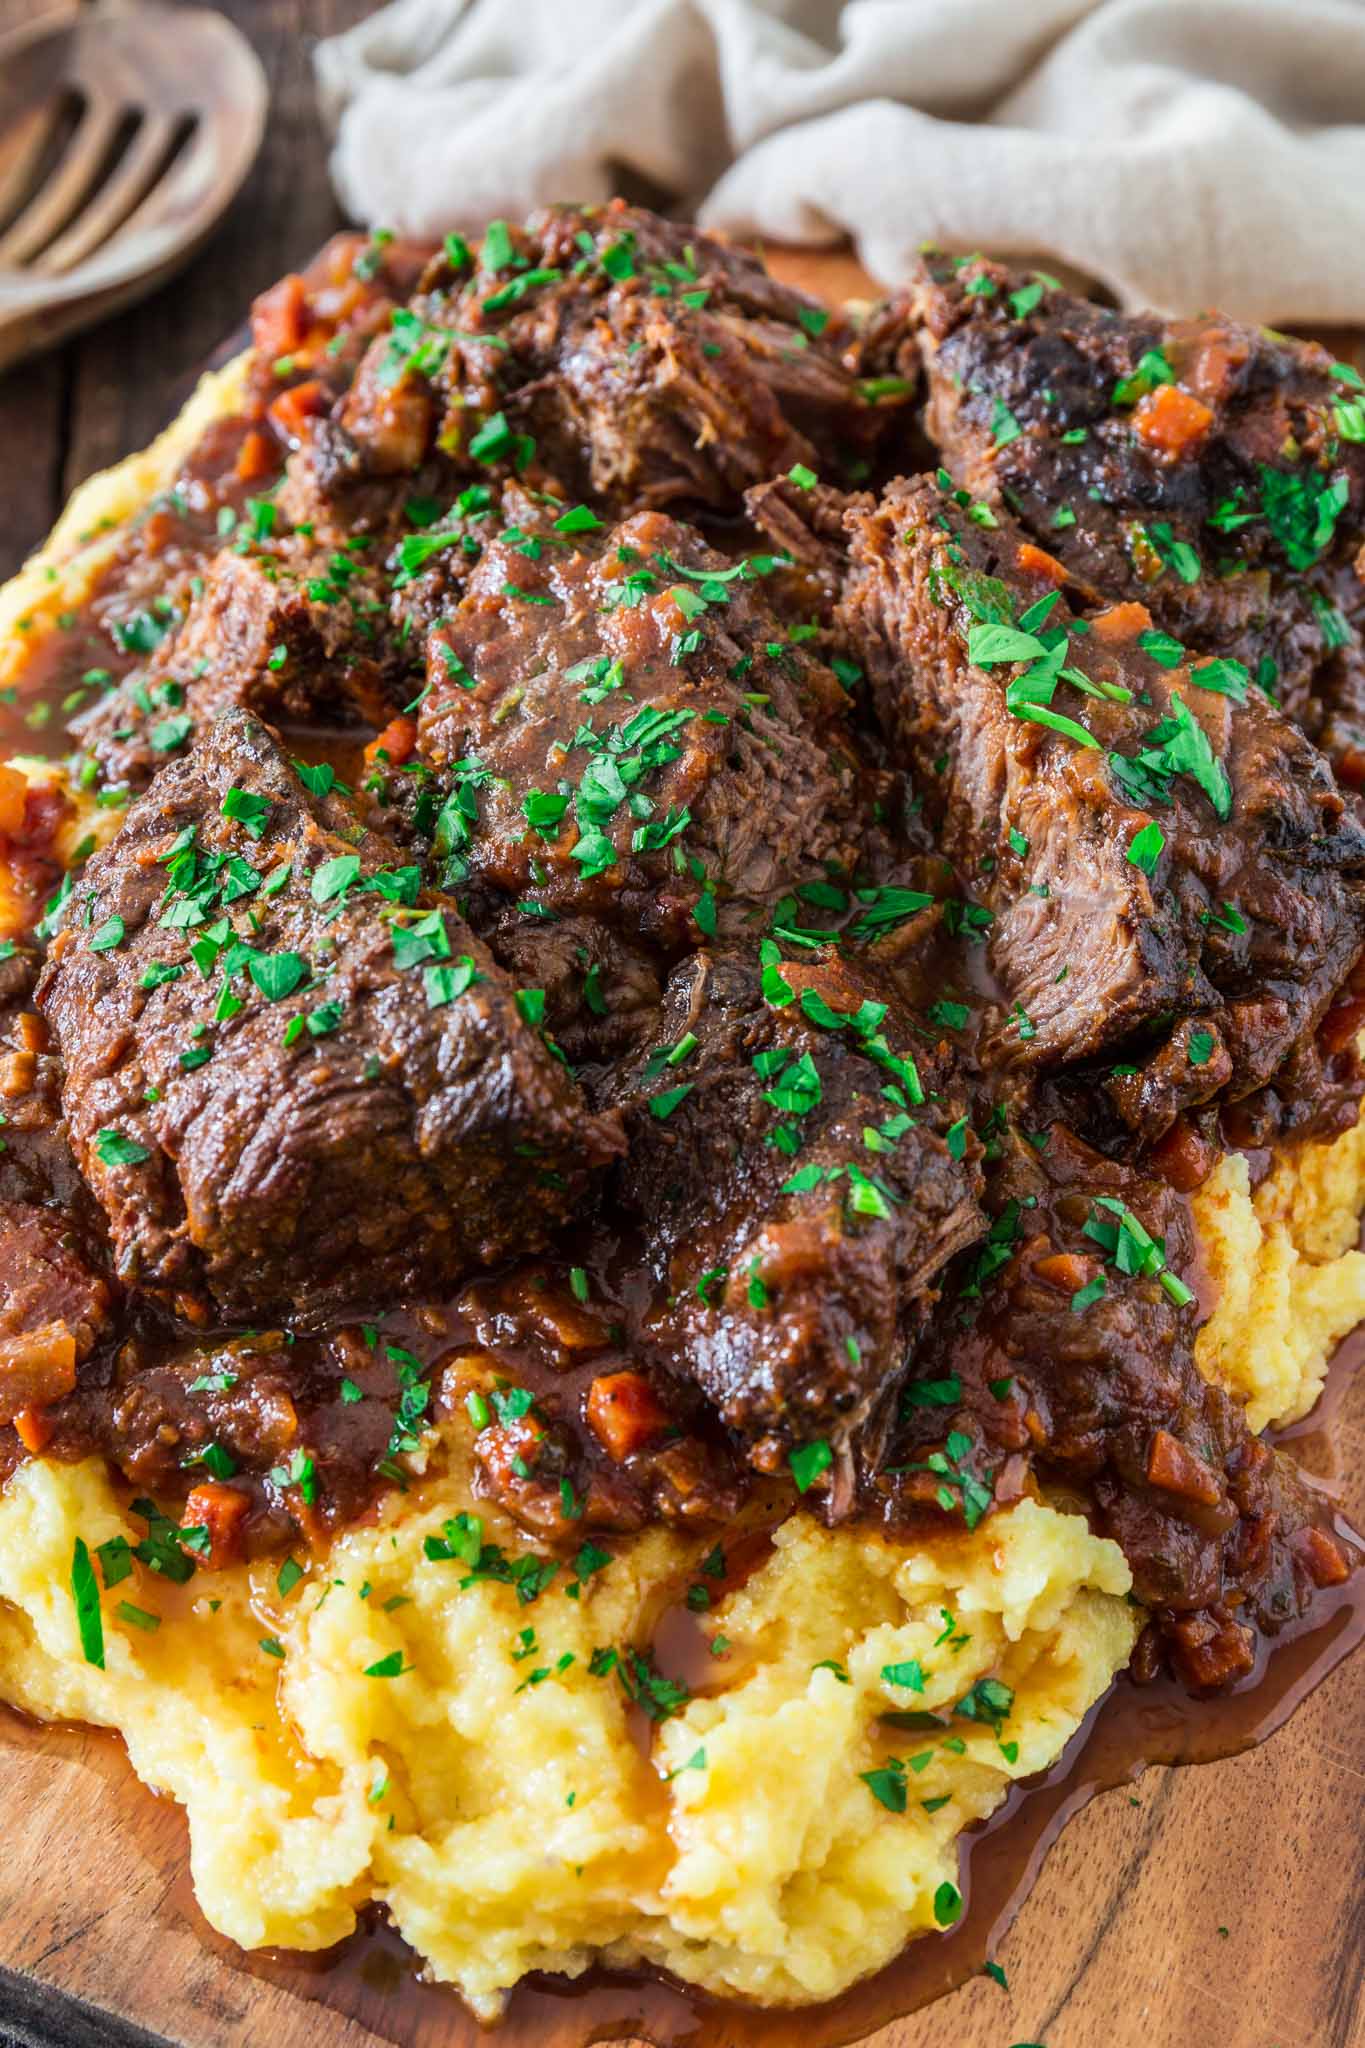 Italian Pot Roast (Stracotto alla Fiorentina) | www.oliviascuisine.com | Cold weather calls for comfort food, like this hearty and cozy Italian Pot Roast. It is made Tuscan style, simmering for hours in a delicious tomato sauce to ensure deep rich flavors while filling your home with the most amazing smells! (Recipe and food photography by @oliviascuisine.)